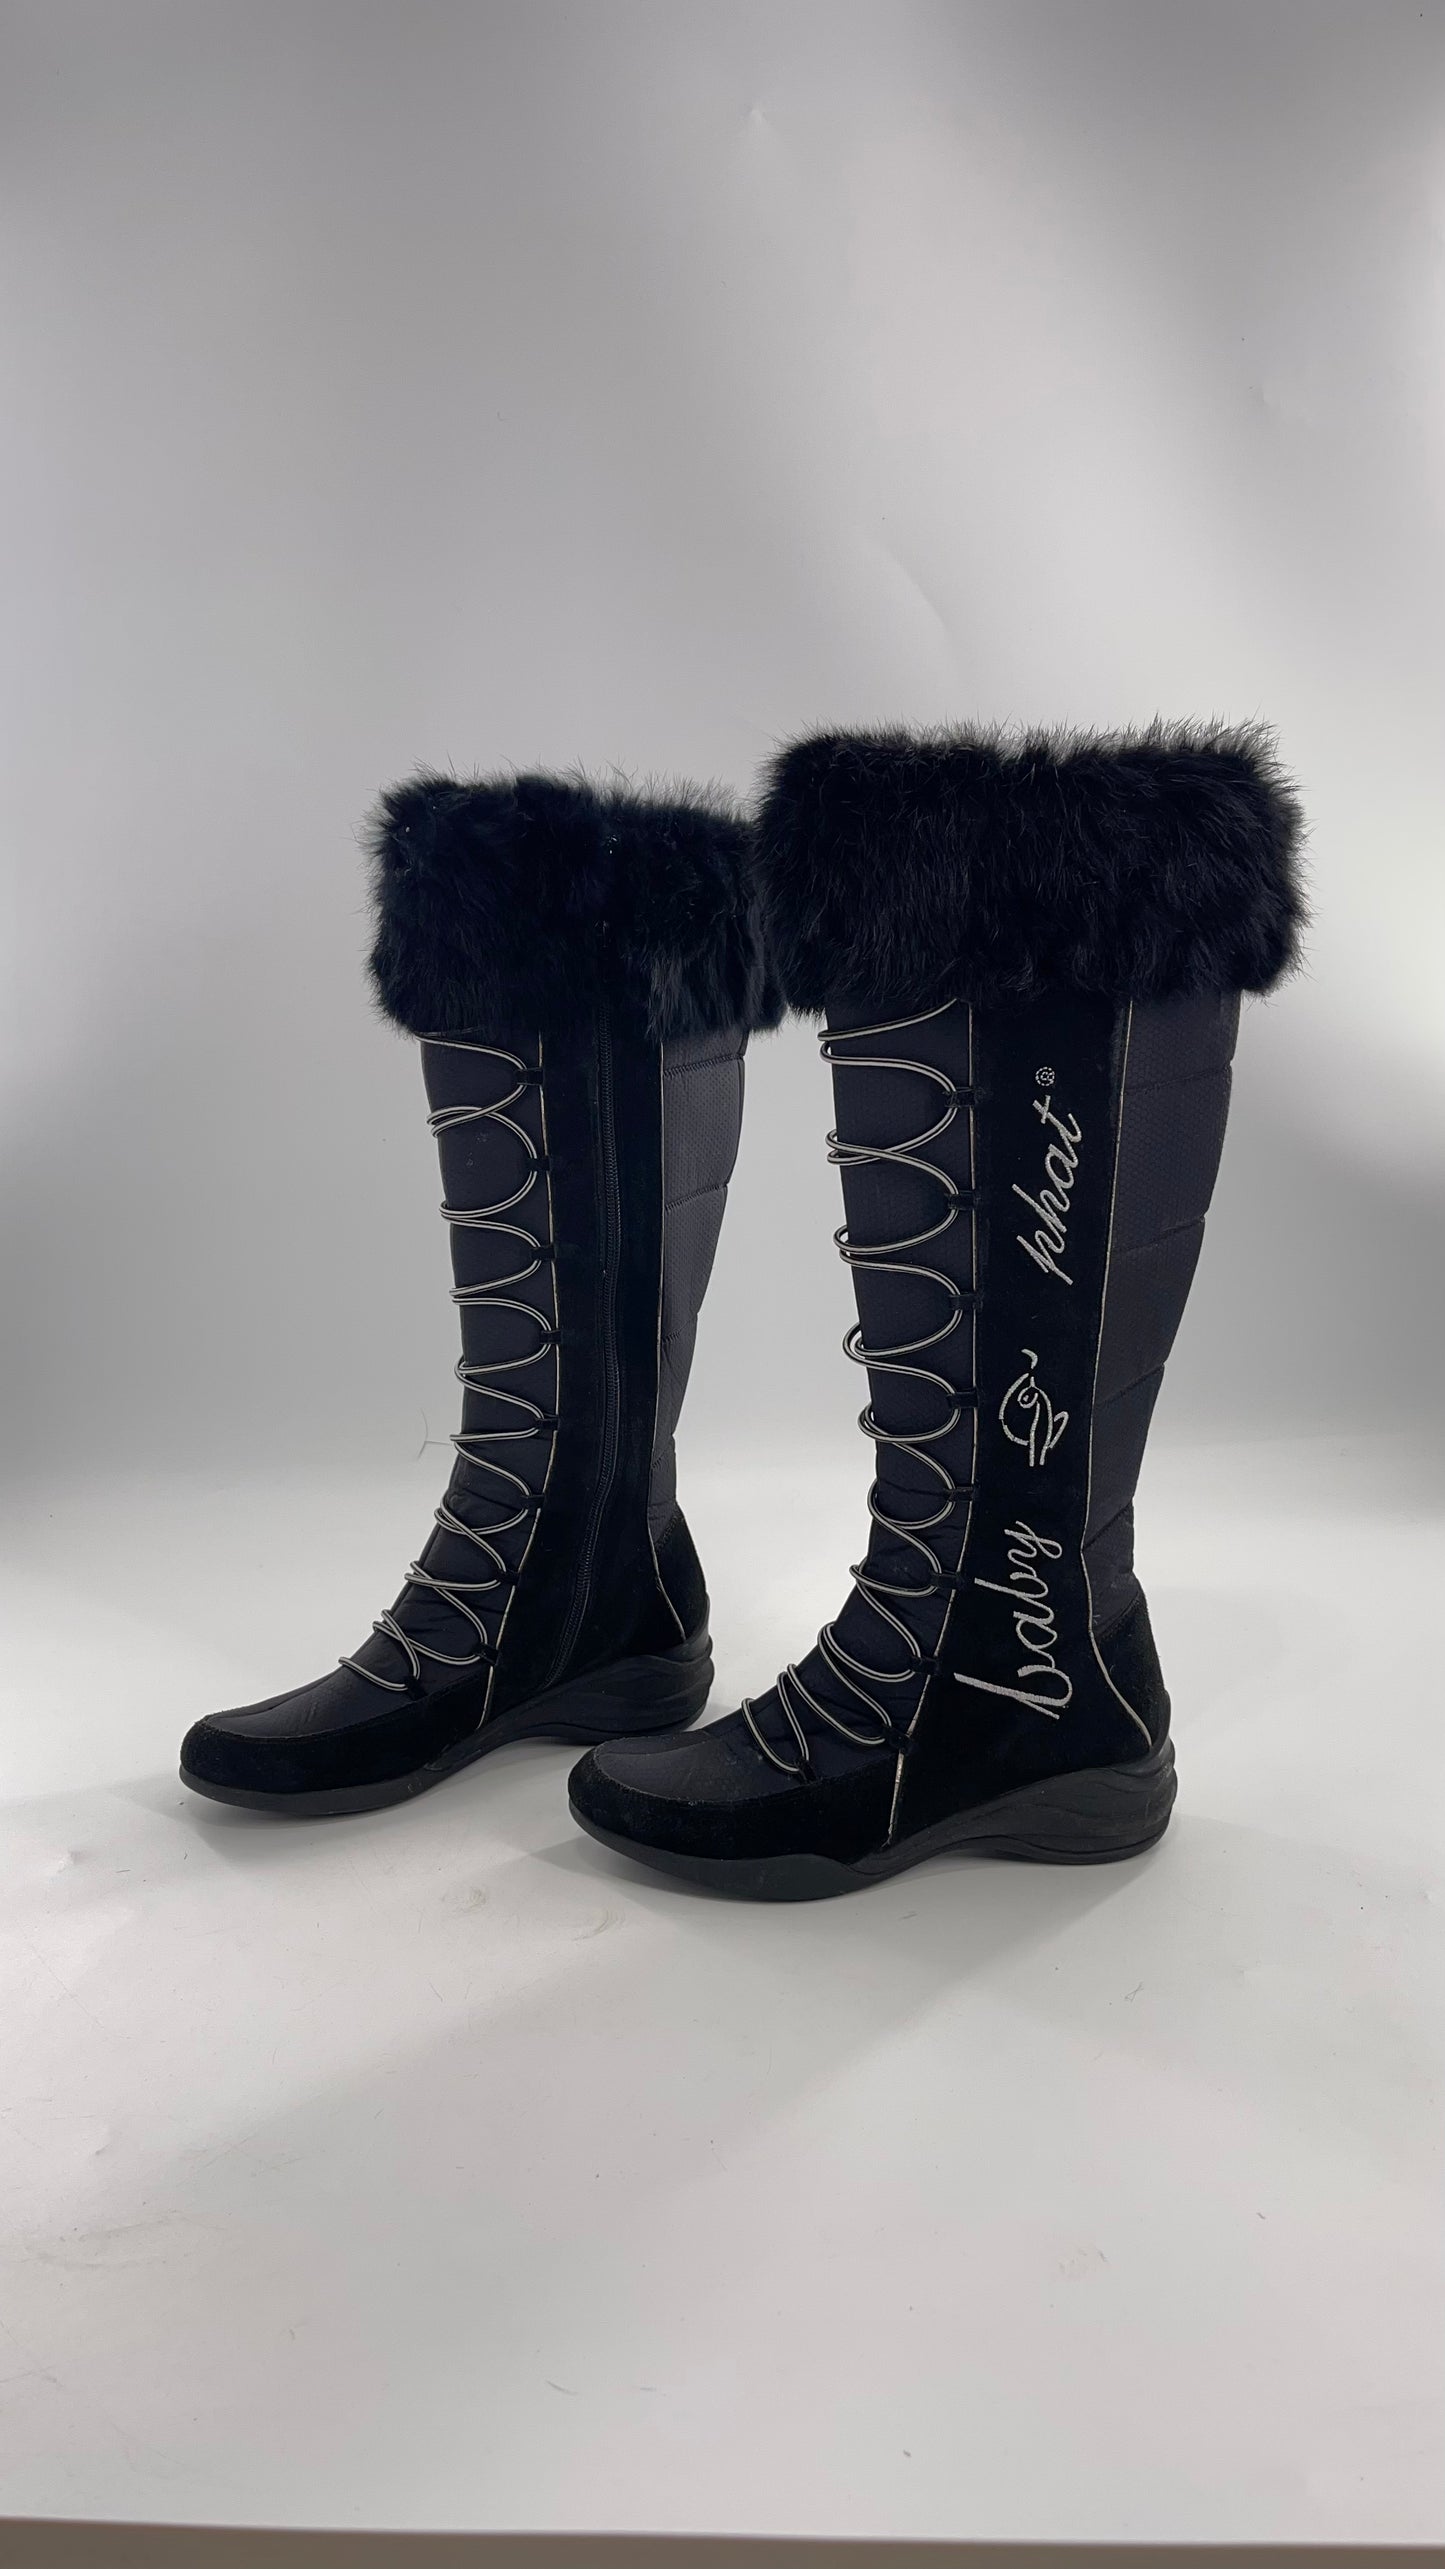 Baby Phat Black Knee High Boots with Rabbit Fur Trim, Bungee Cord Ties, and Embroidered Logo Design